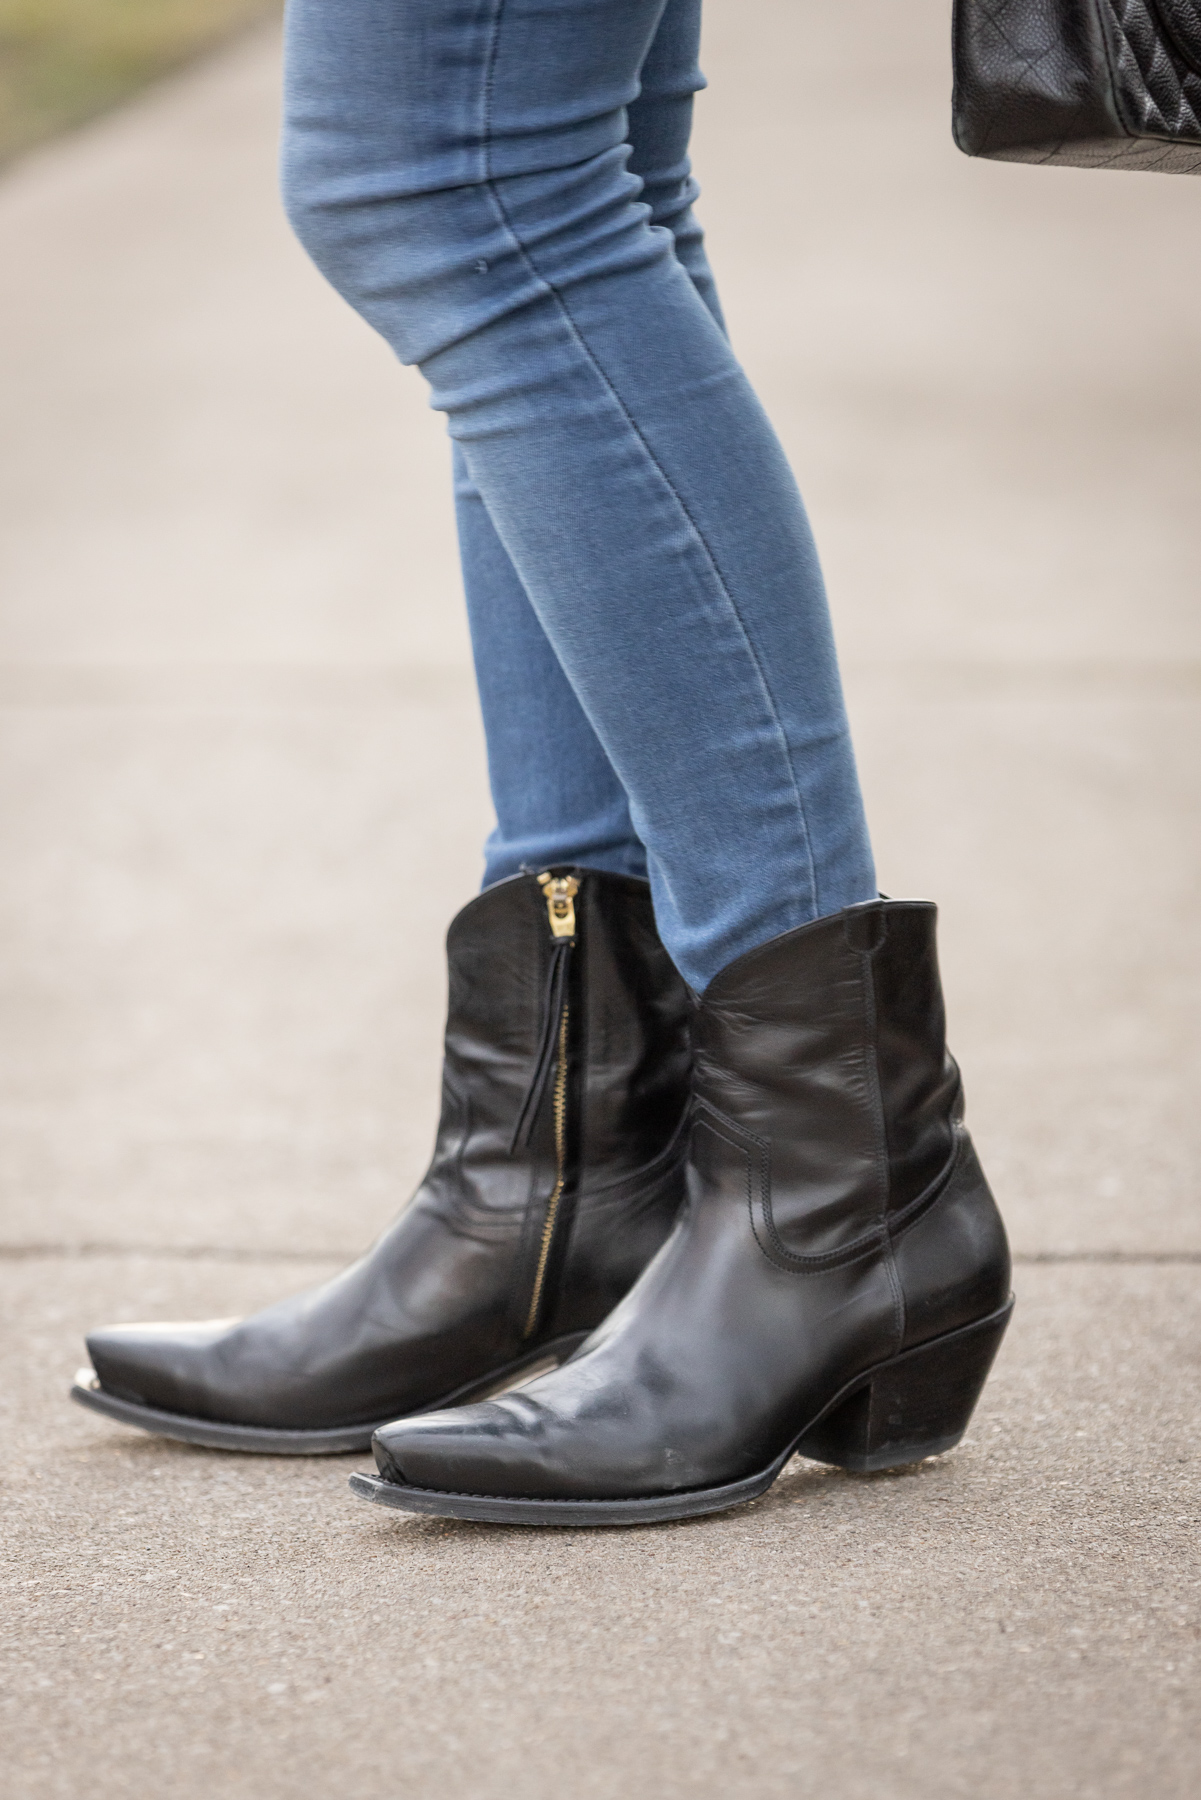 r13 Cowboy Boots styled by top Dallas fashion blogger, Pretty Little Shoppers